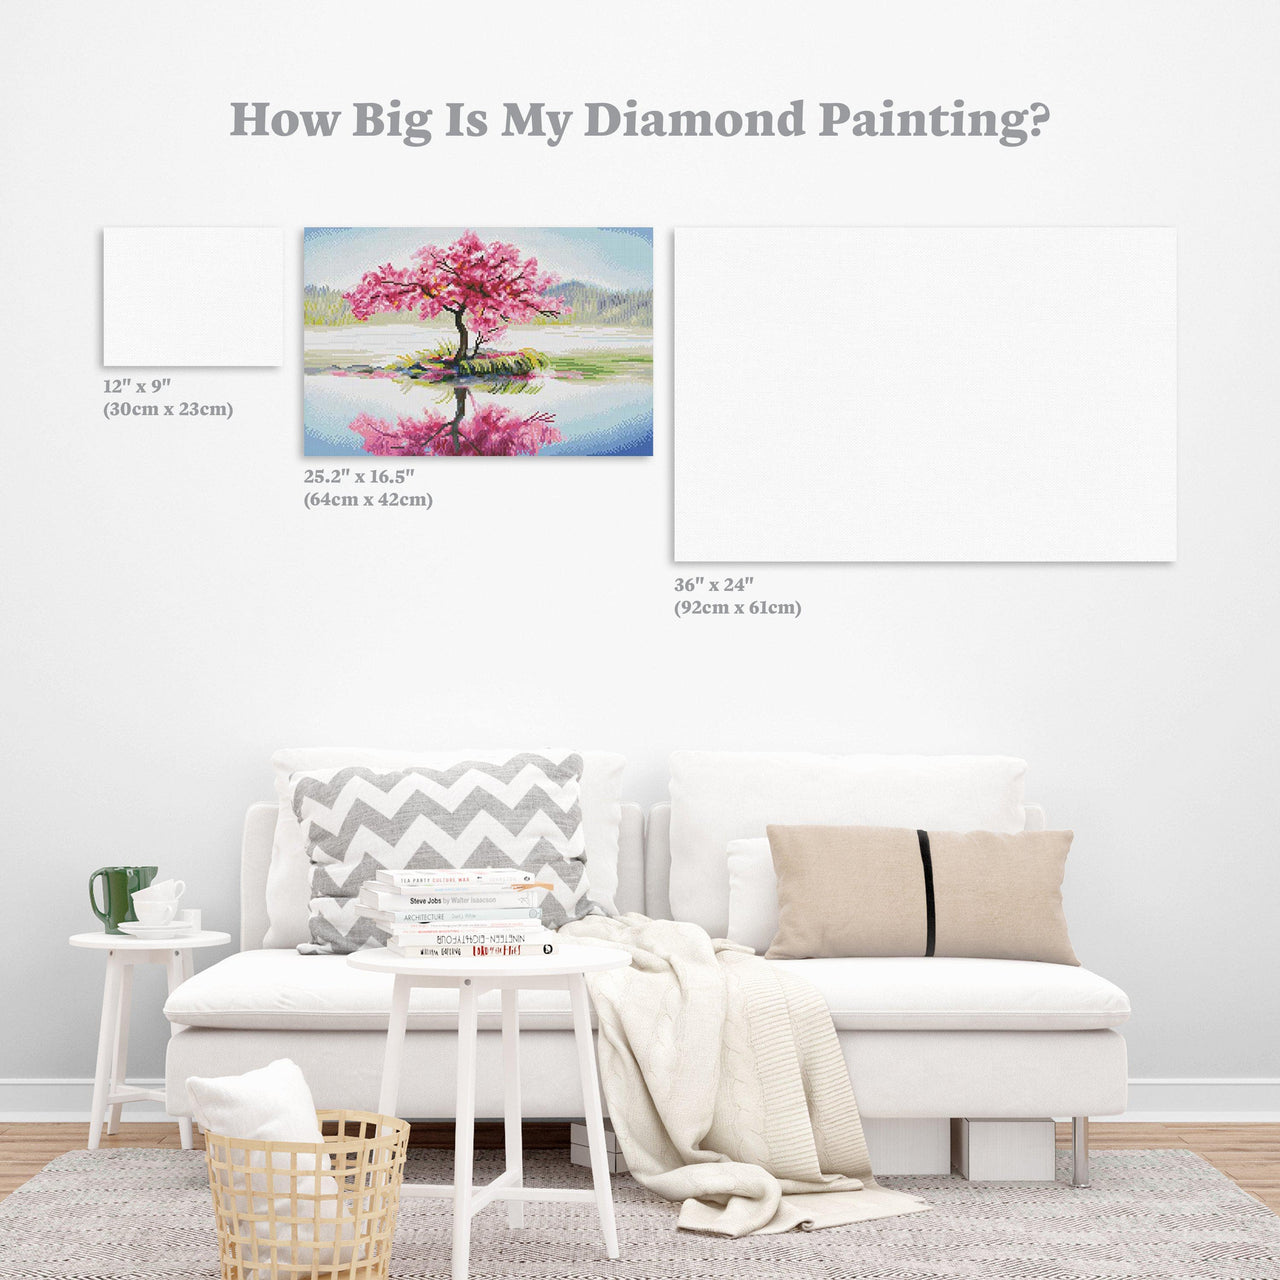 Diamond Painting Cherry Blossom Reflection 16.5" x 25.2″ (42cm x 64cm) / Round With 39 Colors Including 3 ABs / 33,448